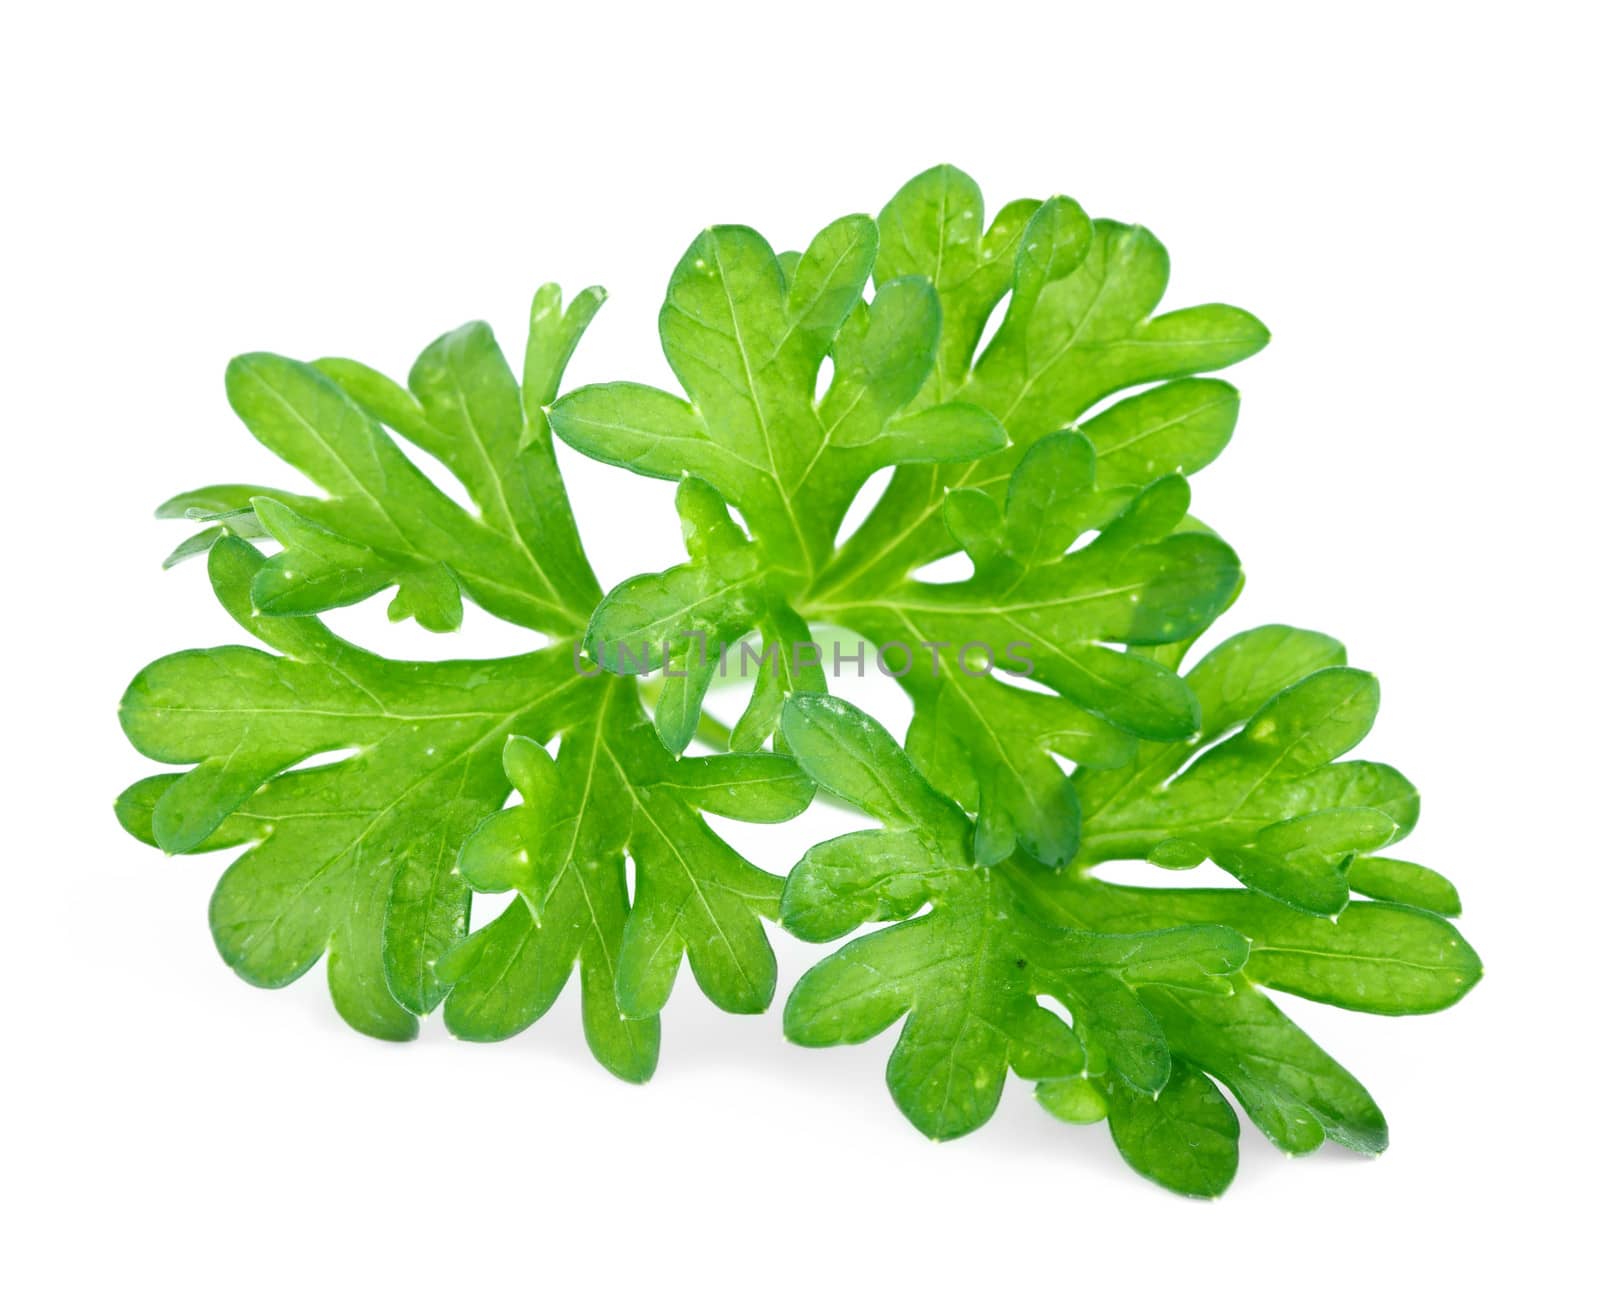 Green leaves of parsley isolated on white background